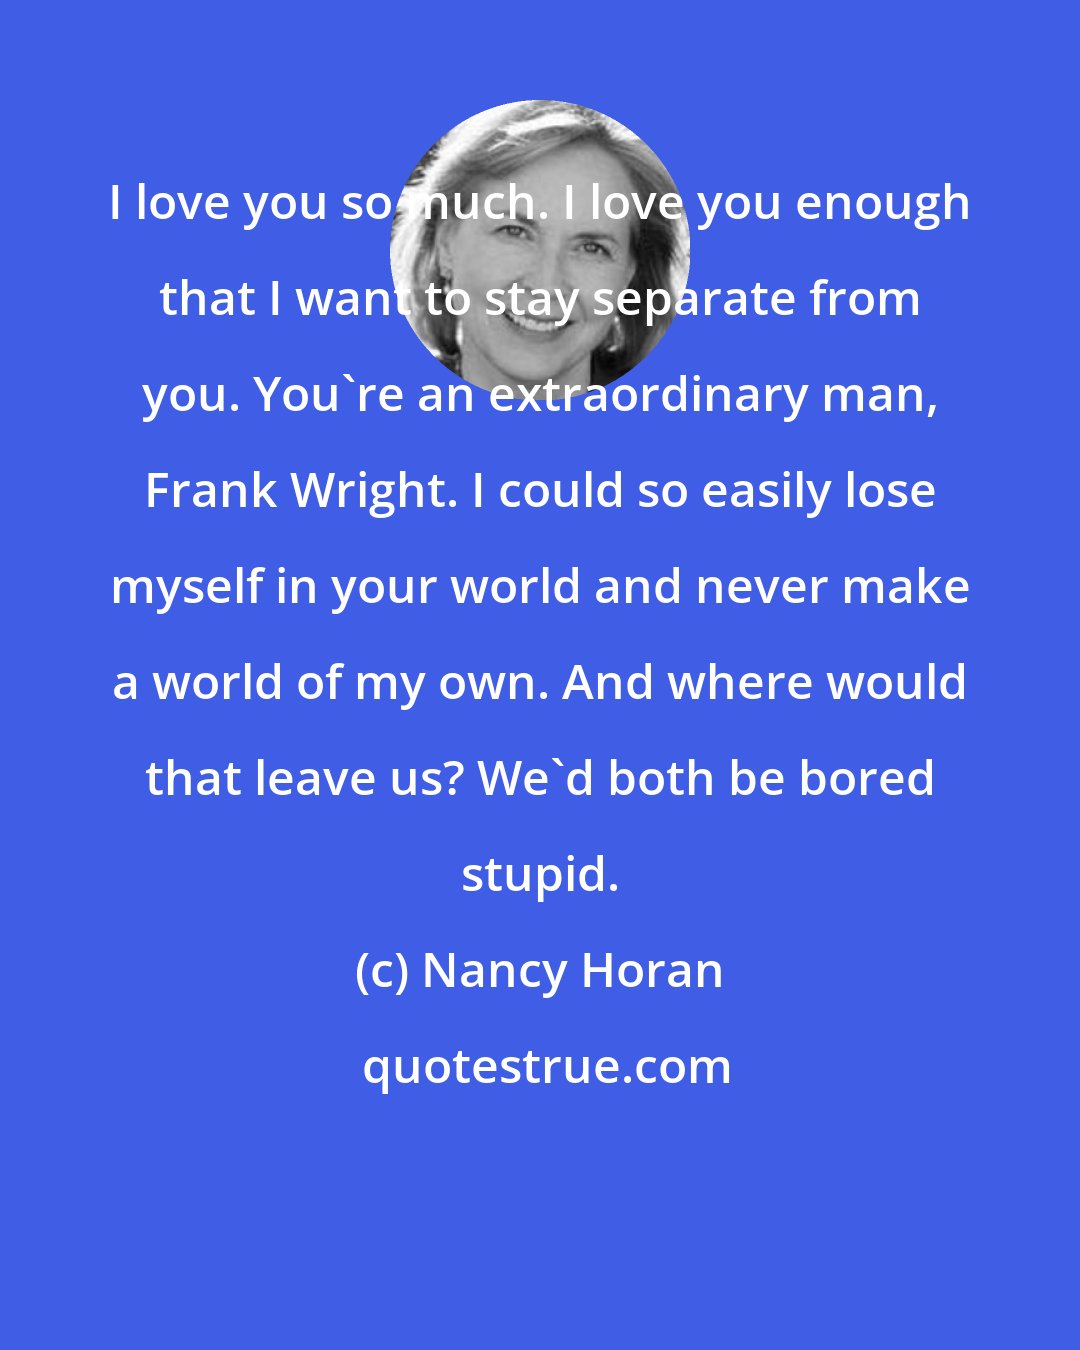 Nancy Horan: I love you so much. I love you enough that I want to stay separate from you. You're an extraordinary man, Frank Wright. I could so easily lose myself in your world and never make a world of my own. And where would that leave us? We'd both be bored stupid.